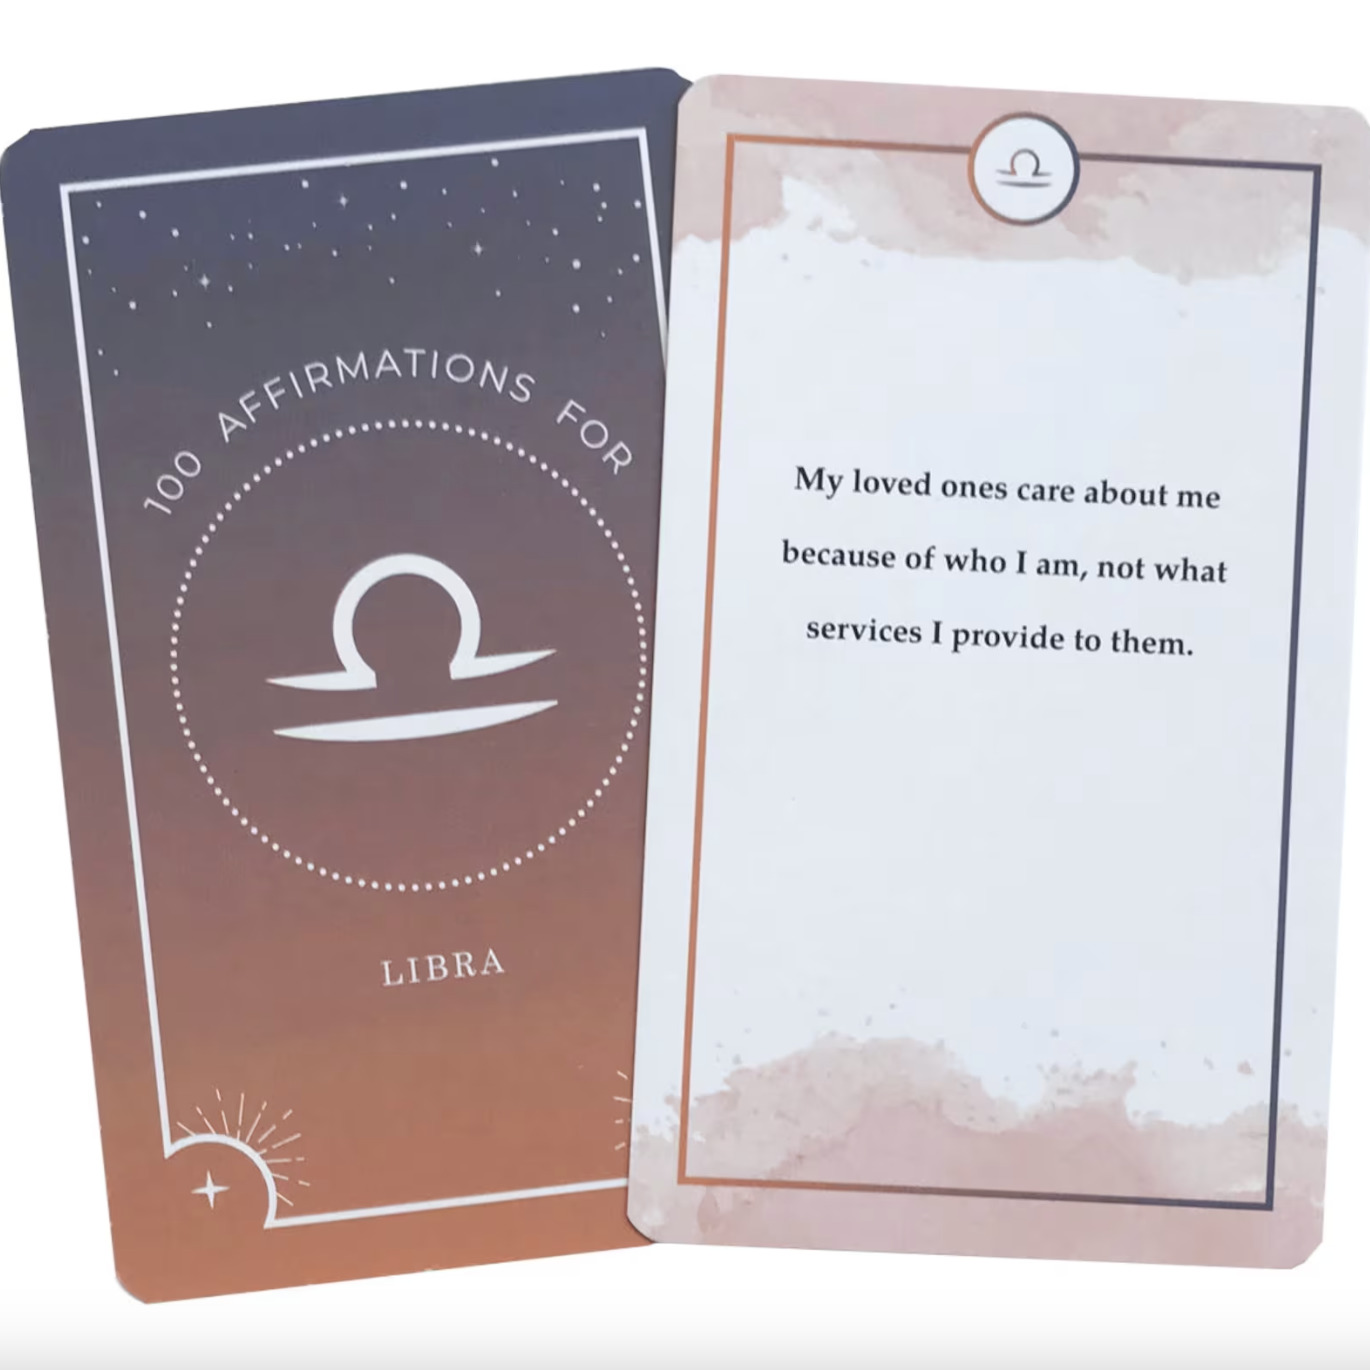 Affirmation cards for idealistic Libra